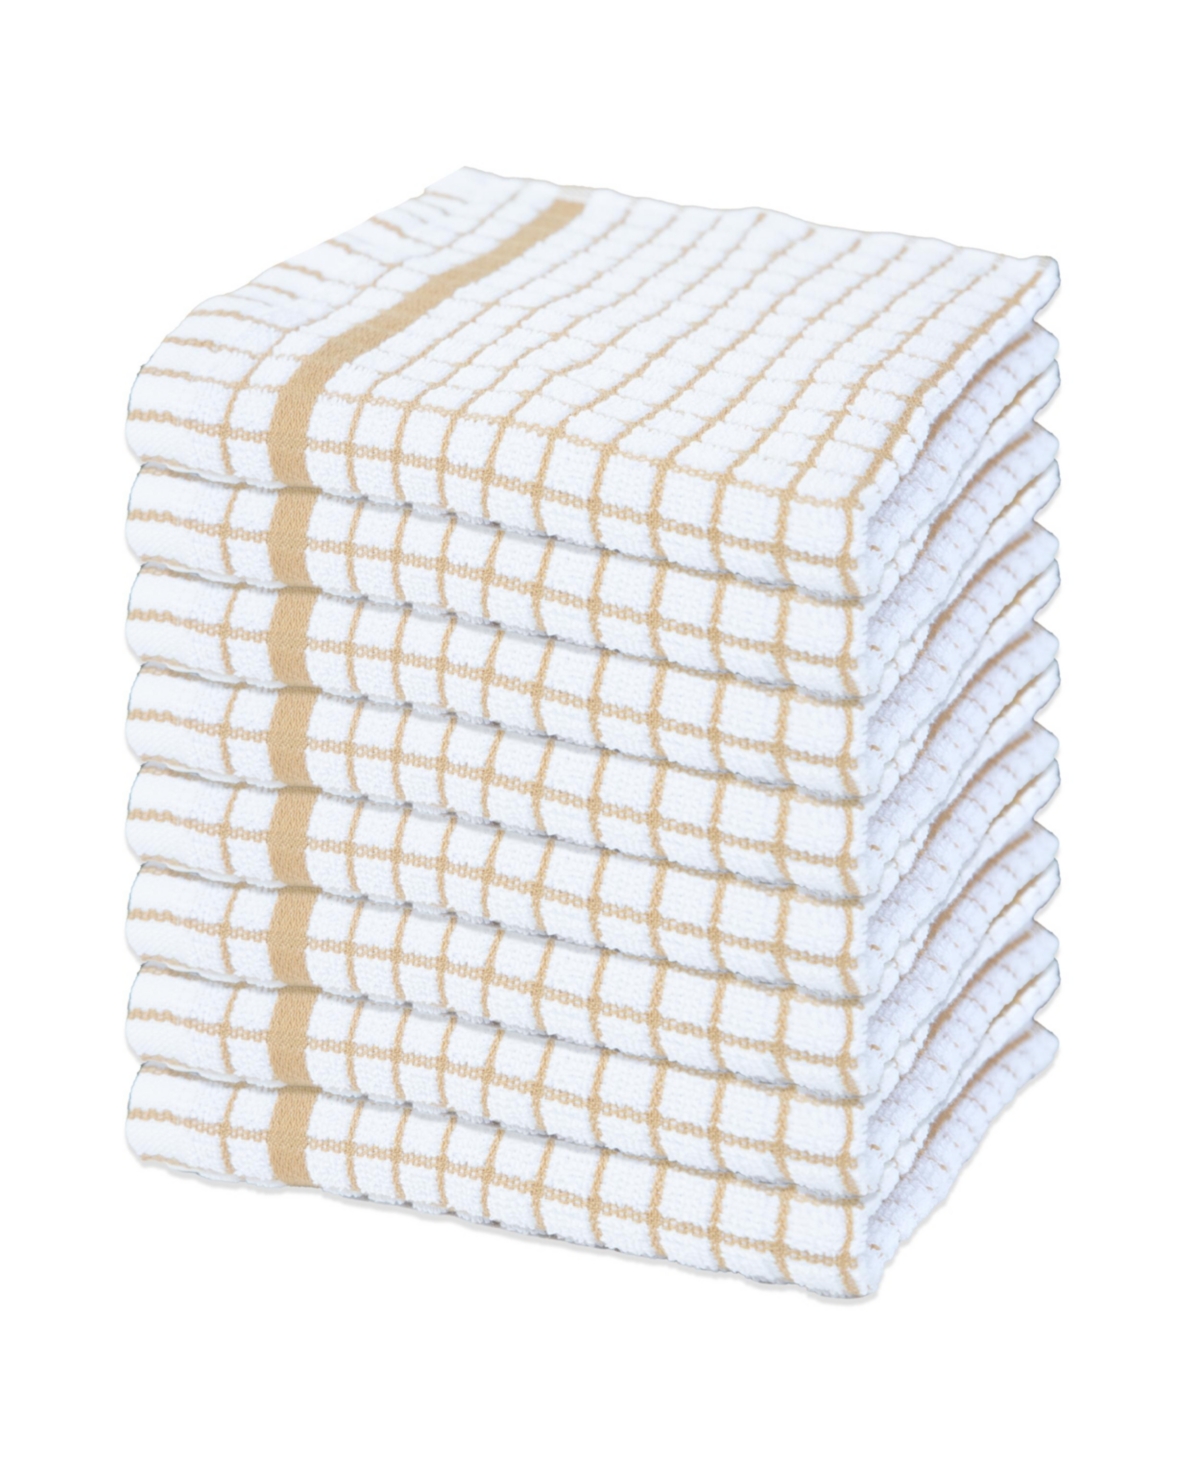 Classic Checkered Dishcloths (Pack of 8), 100% Cotton. Color Options, 13x13 in. - Tan